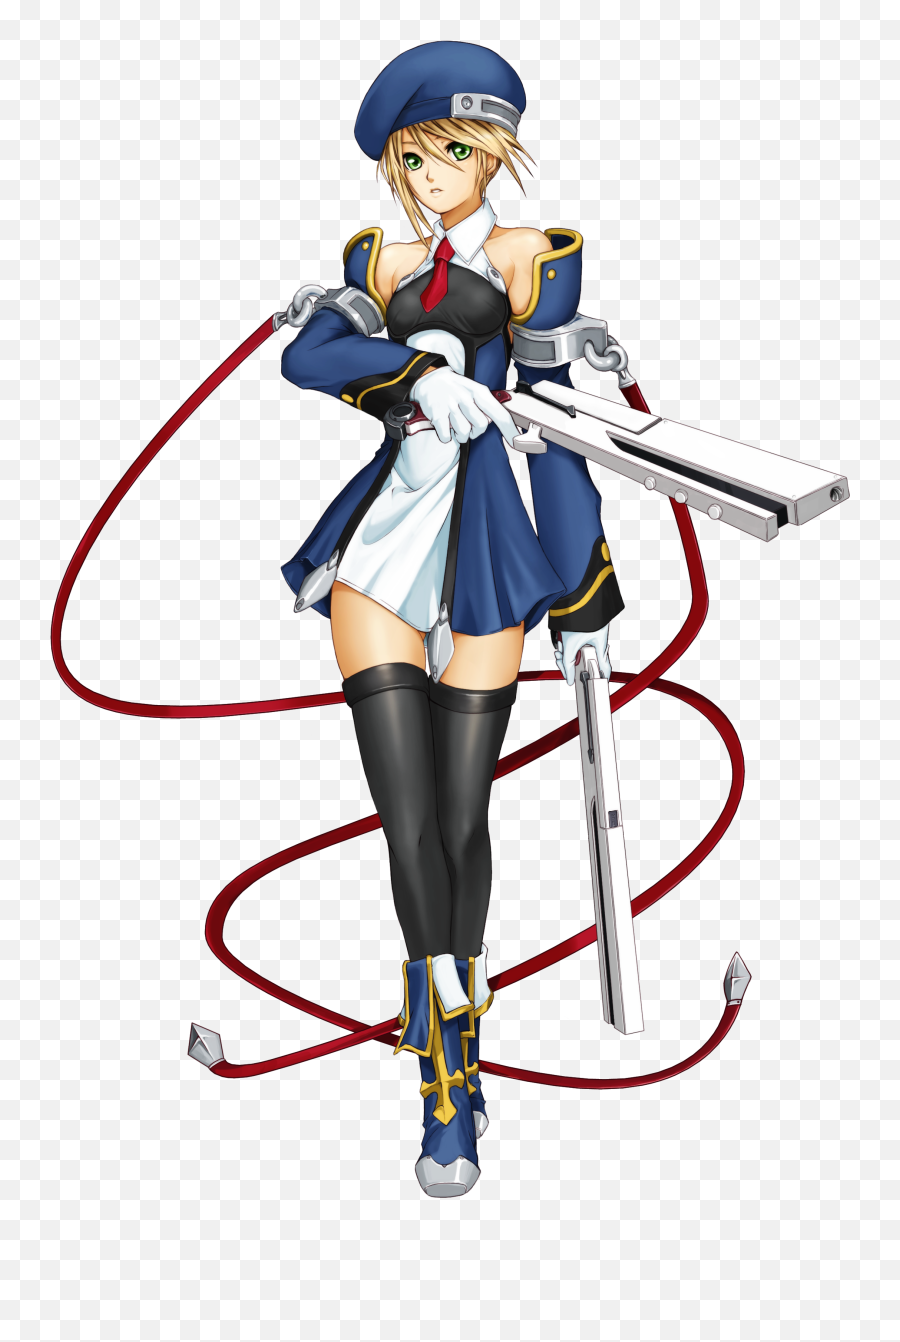 Hidden Weapon Discussion - Blazblue Noel Vermillion Png Emoji,Rwby I Hate This Game Of Emotions We Play